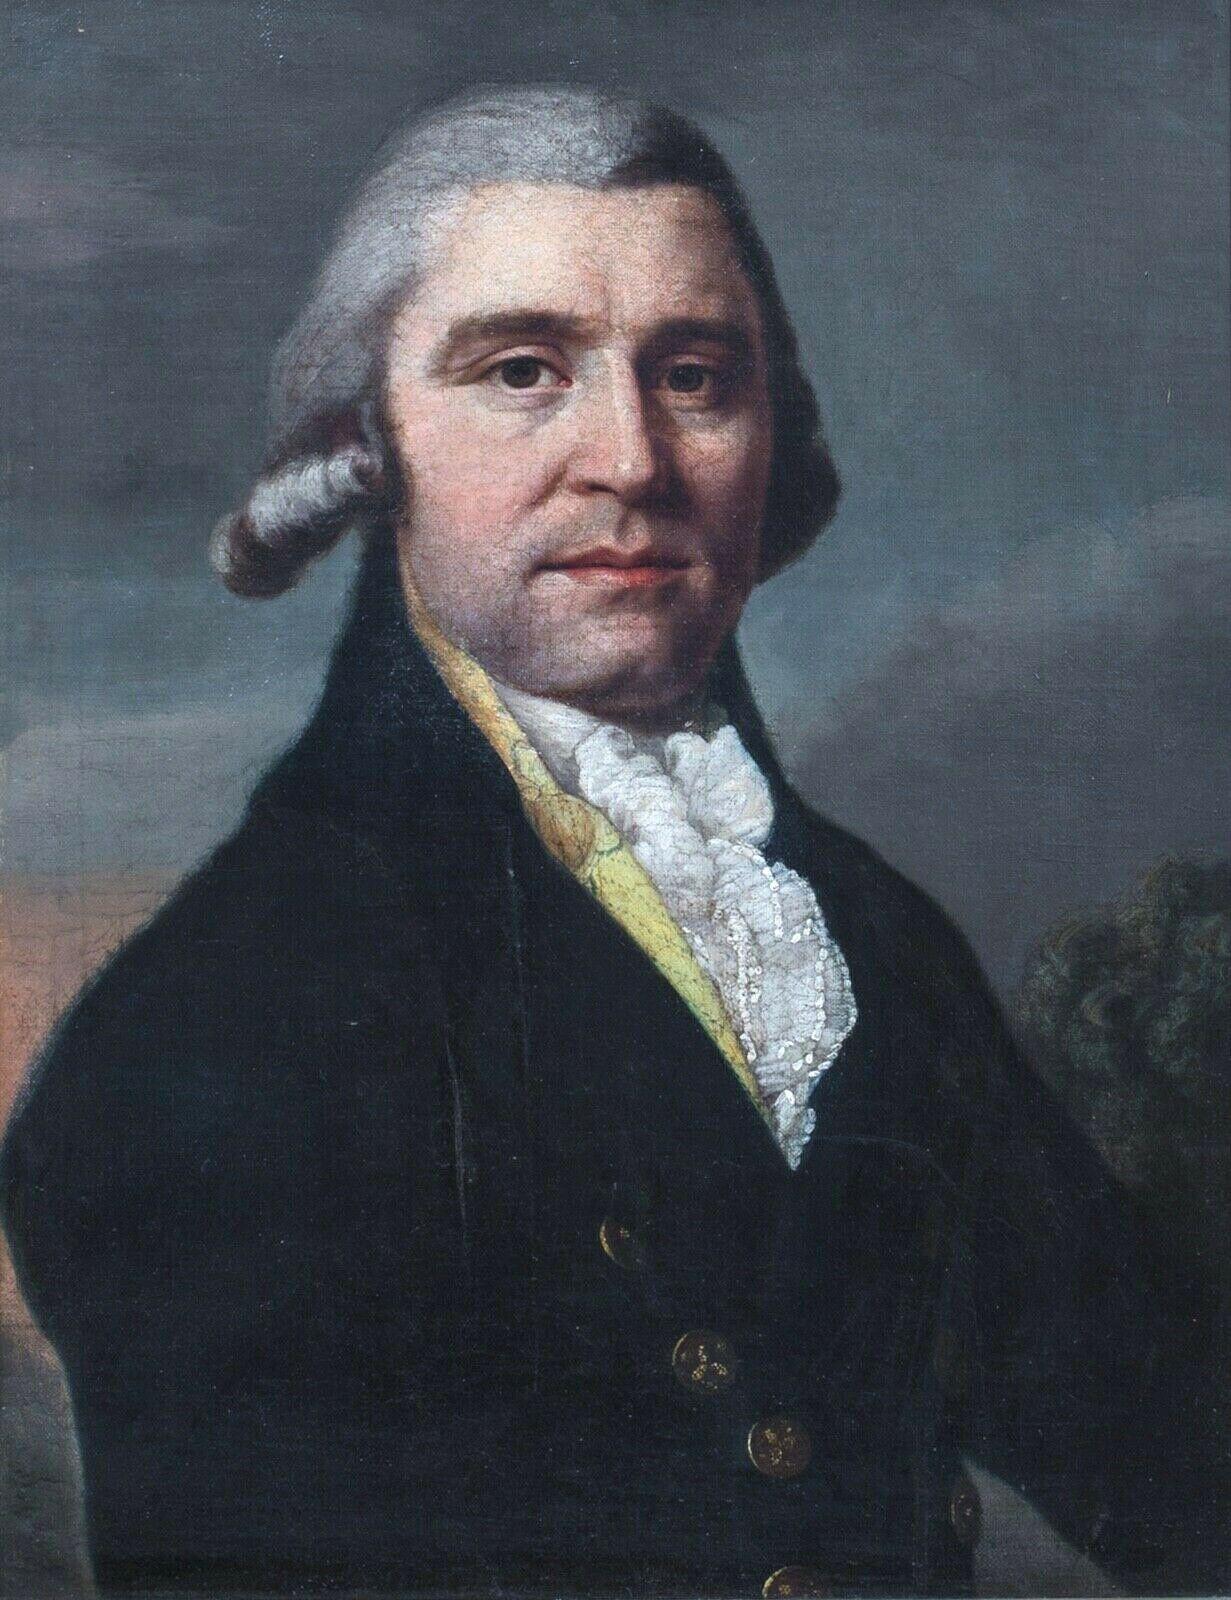 Portrait Of Gentleman, reputed to by Samuel Adams (1722-1803), 18th Century  - Painting by Unknown